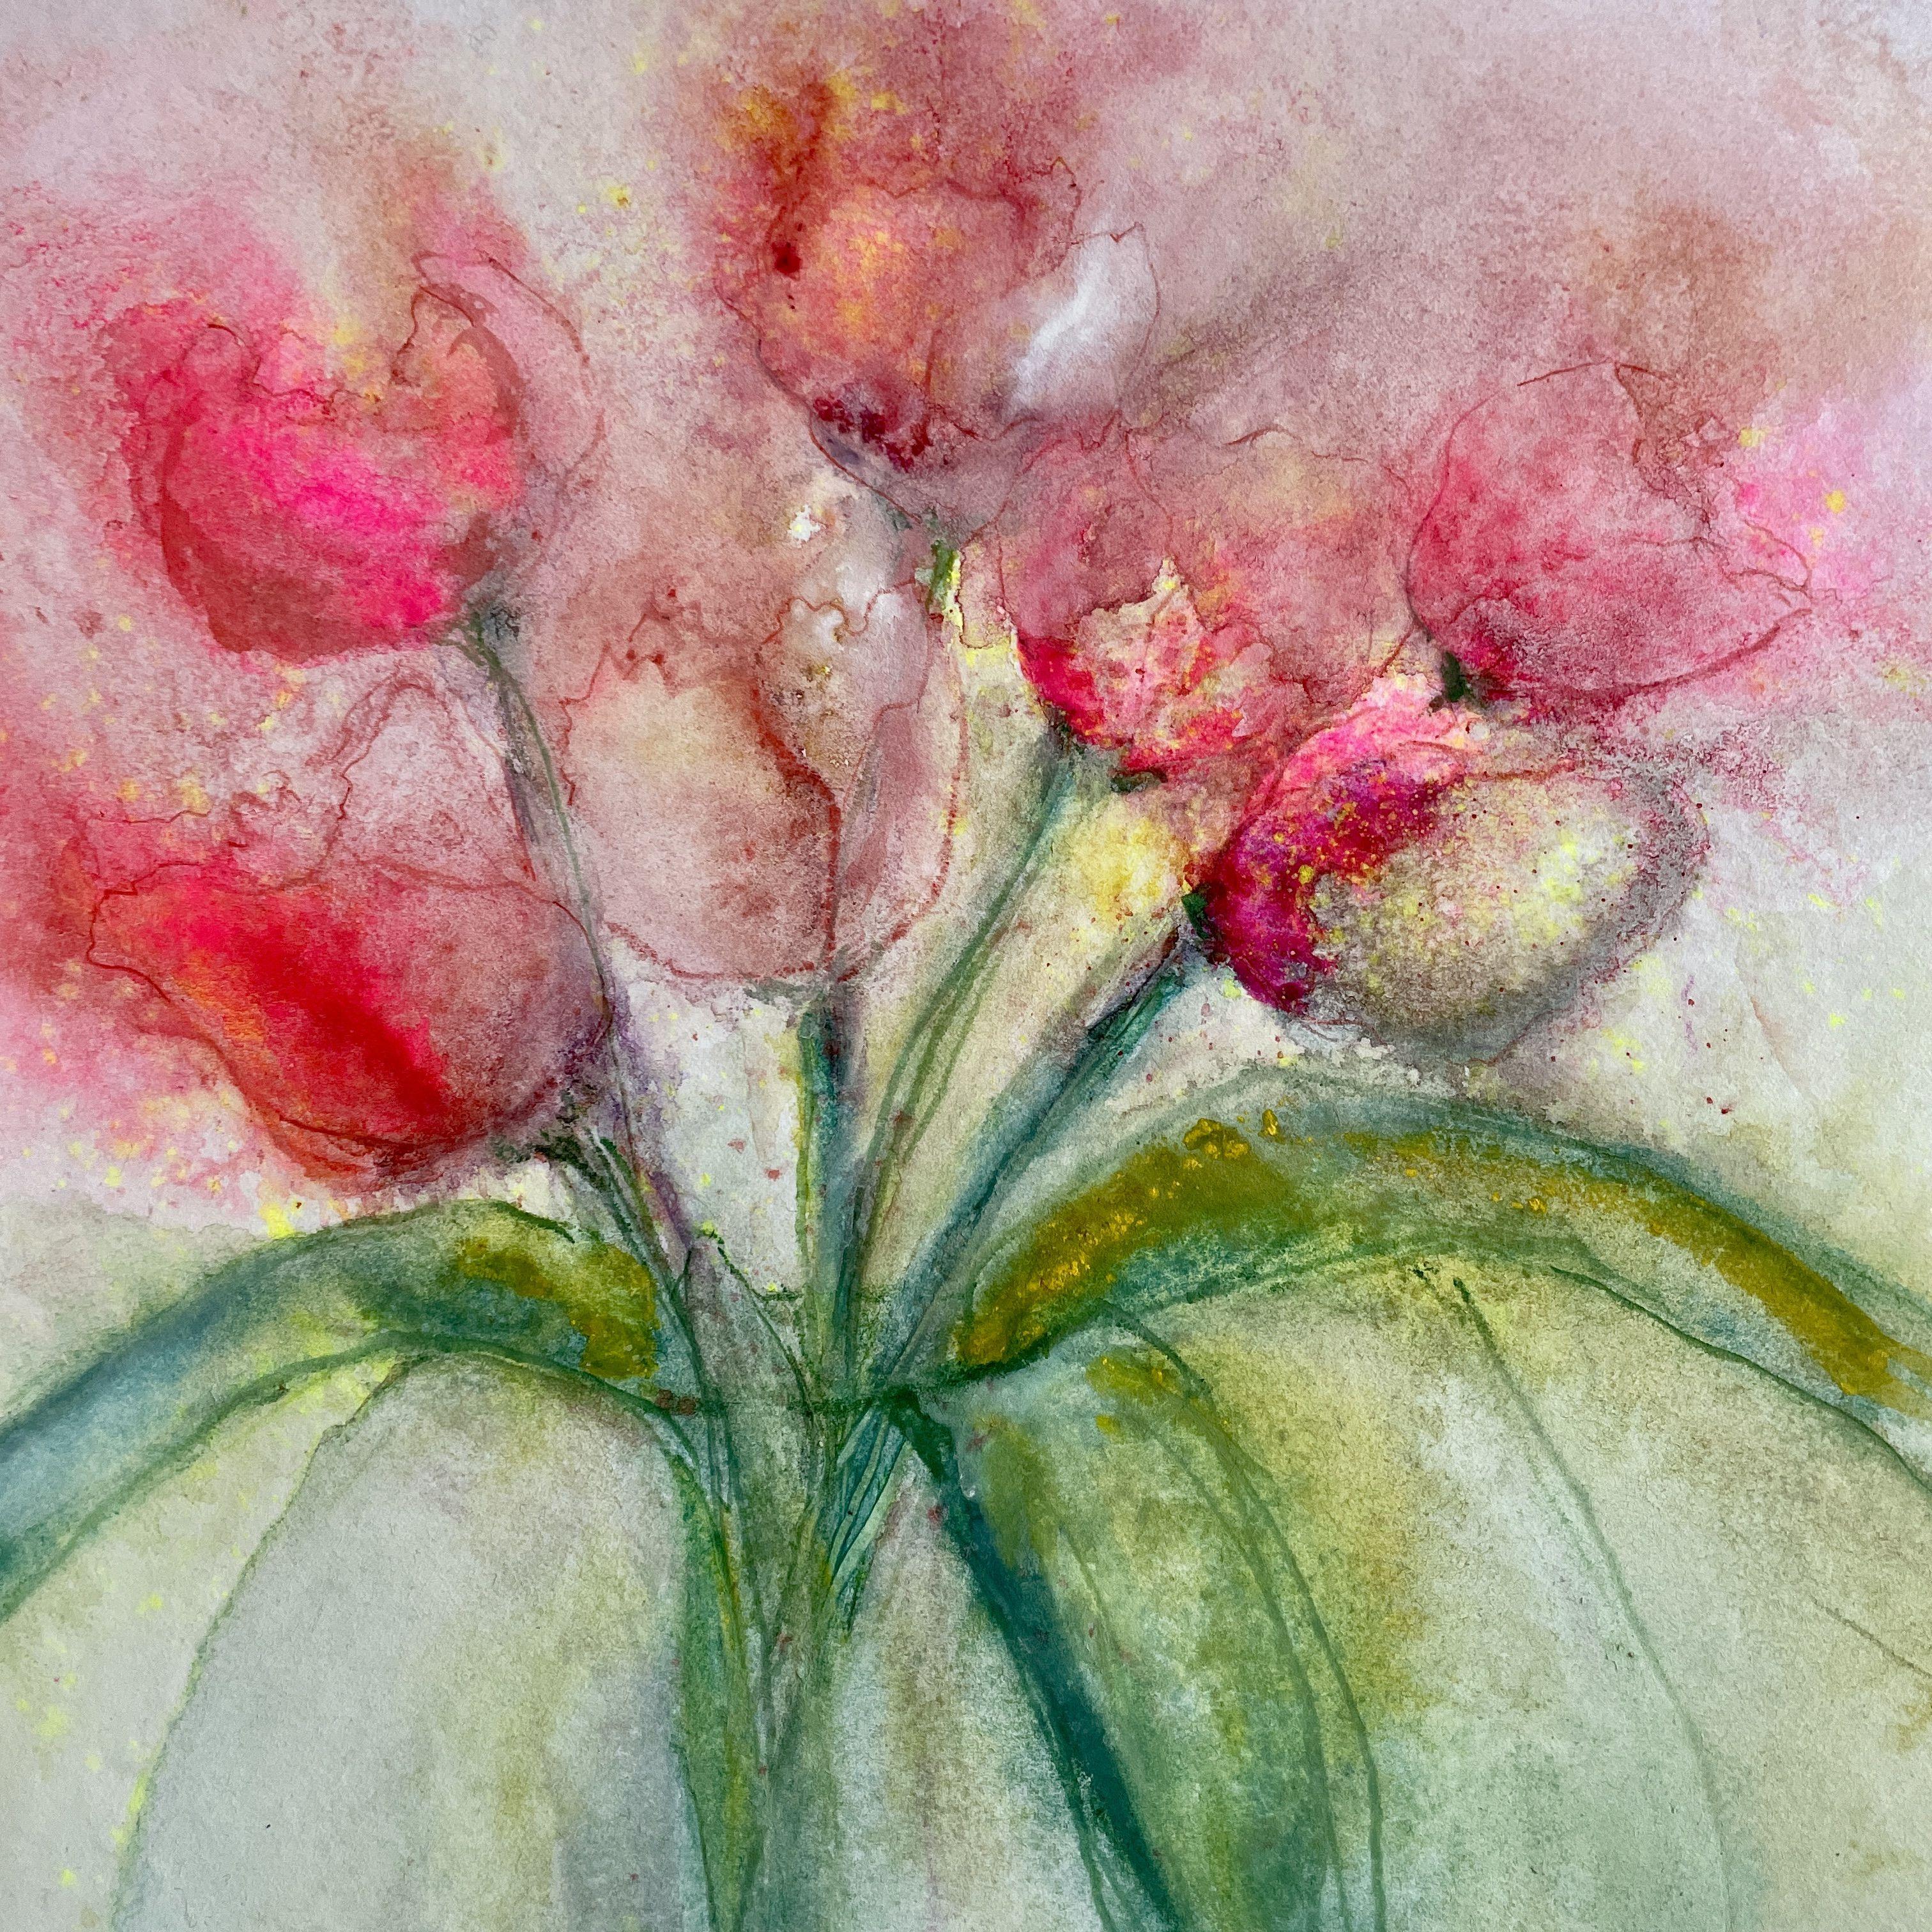 A Hint of Tulips, Painting, Watercolor on Paper - Art by Gesa Reuter